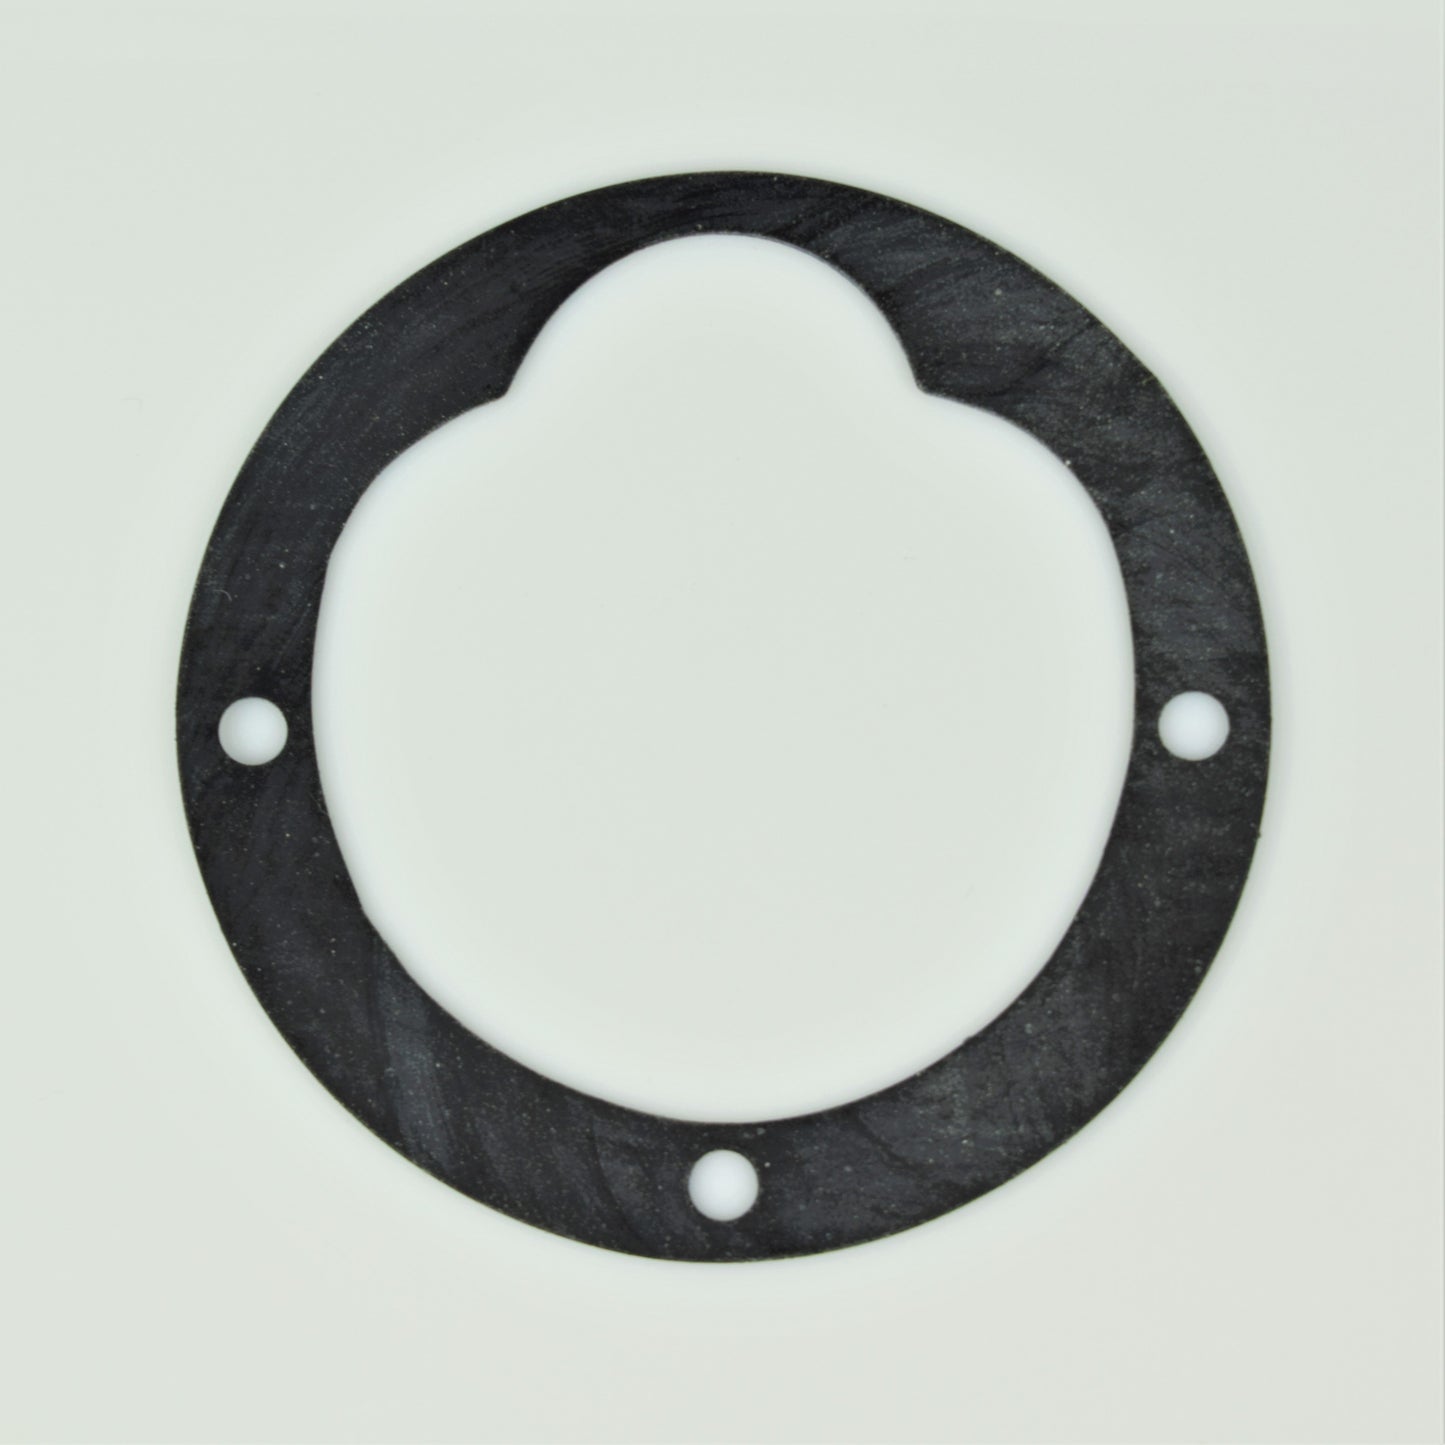 Western Electric Reproduction 59A Dial Gasket